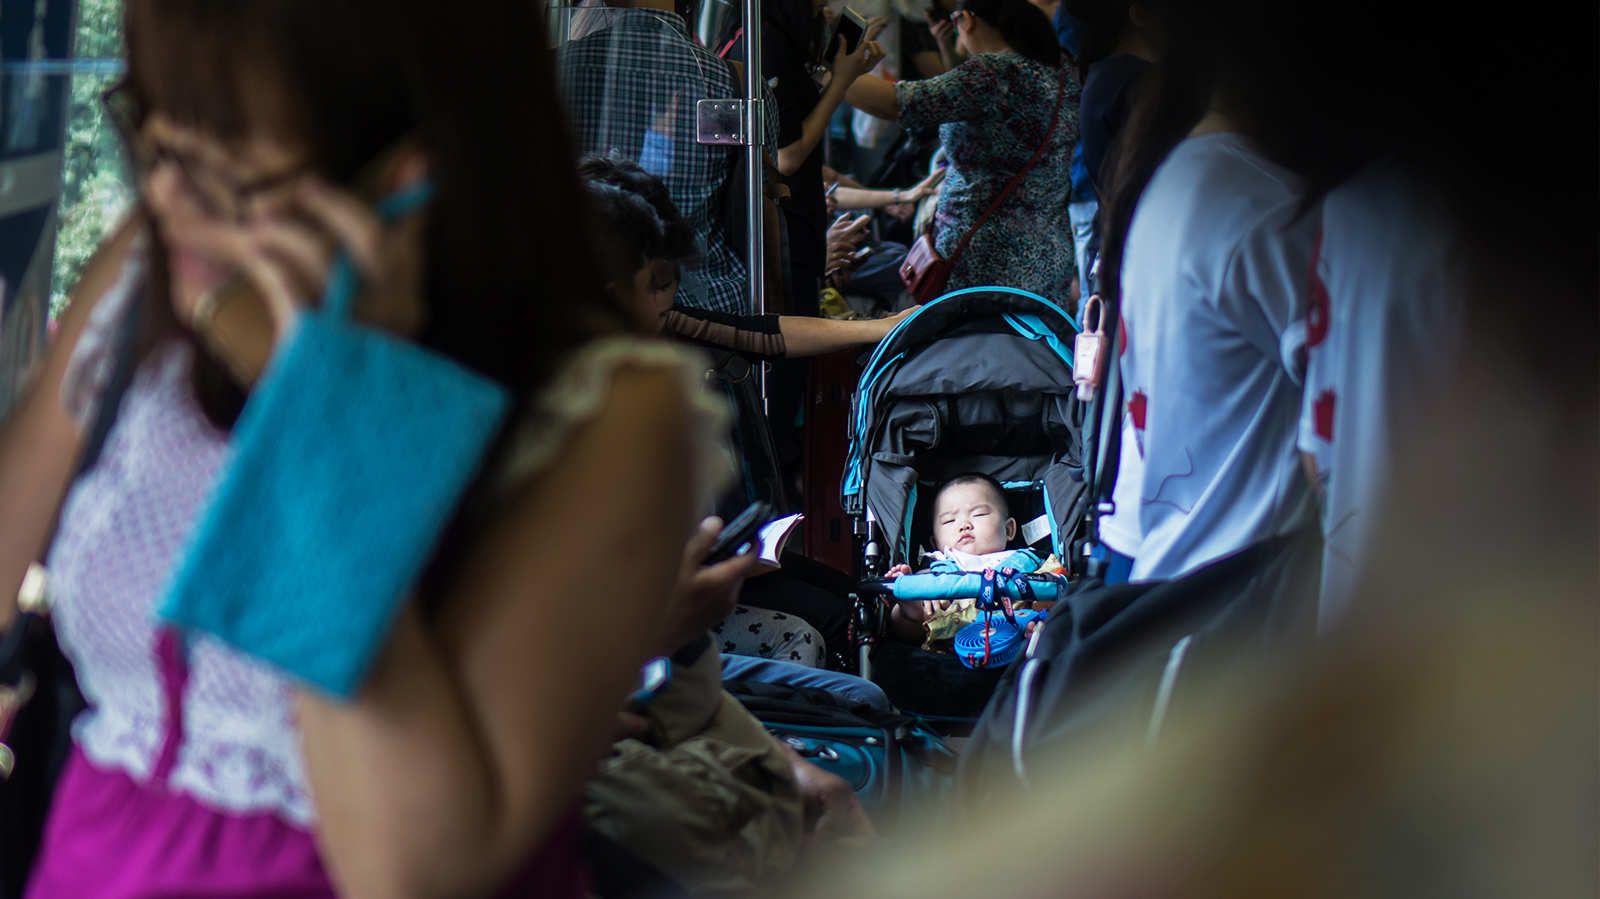 Singapore, give parents with kids and pregnant women a break on public transport